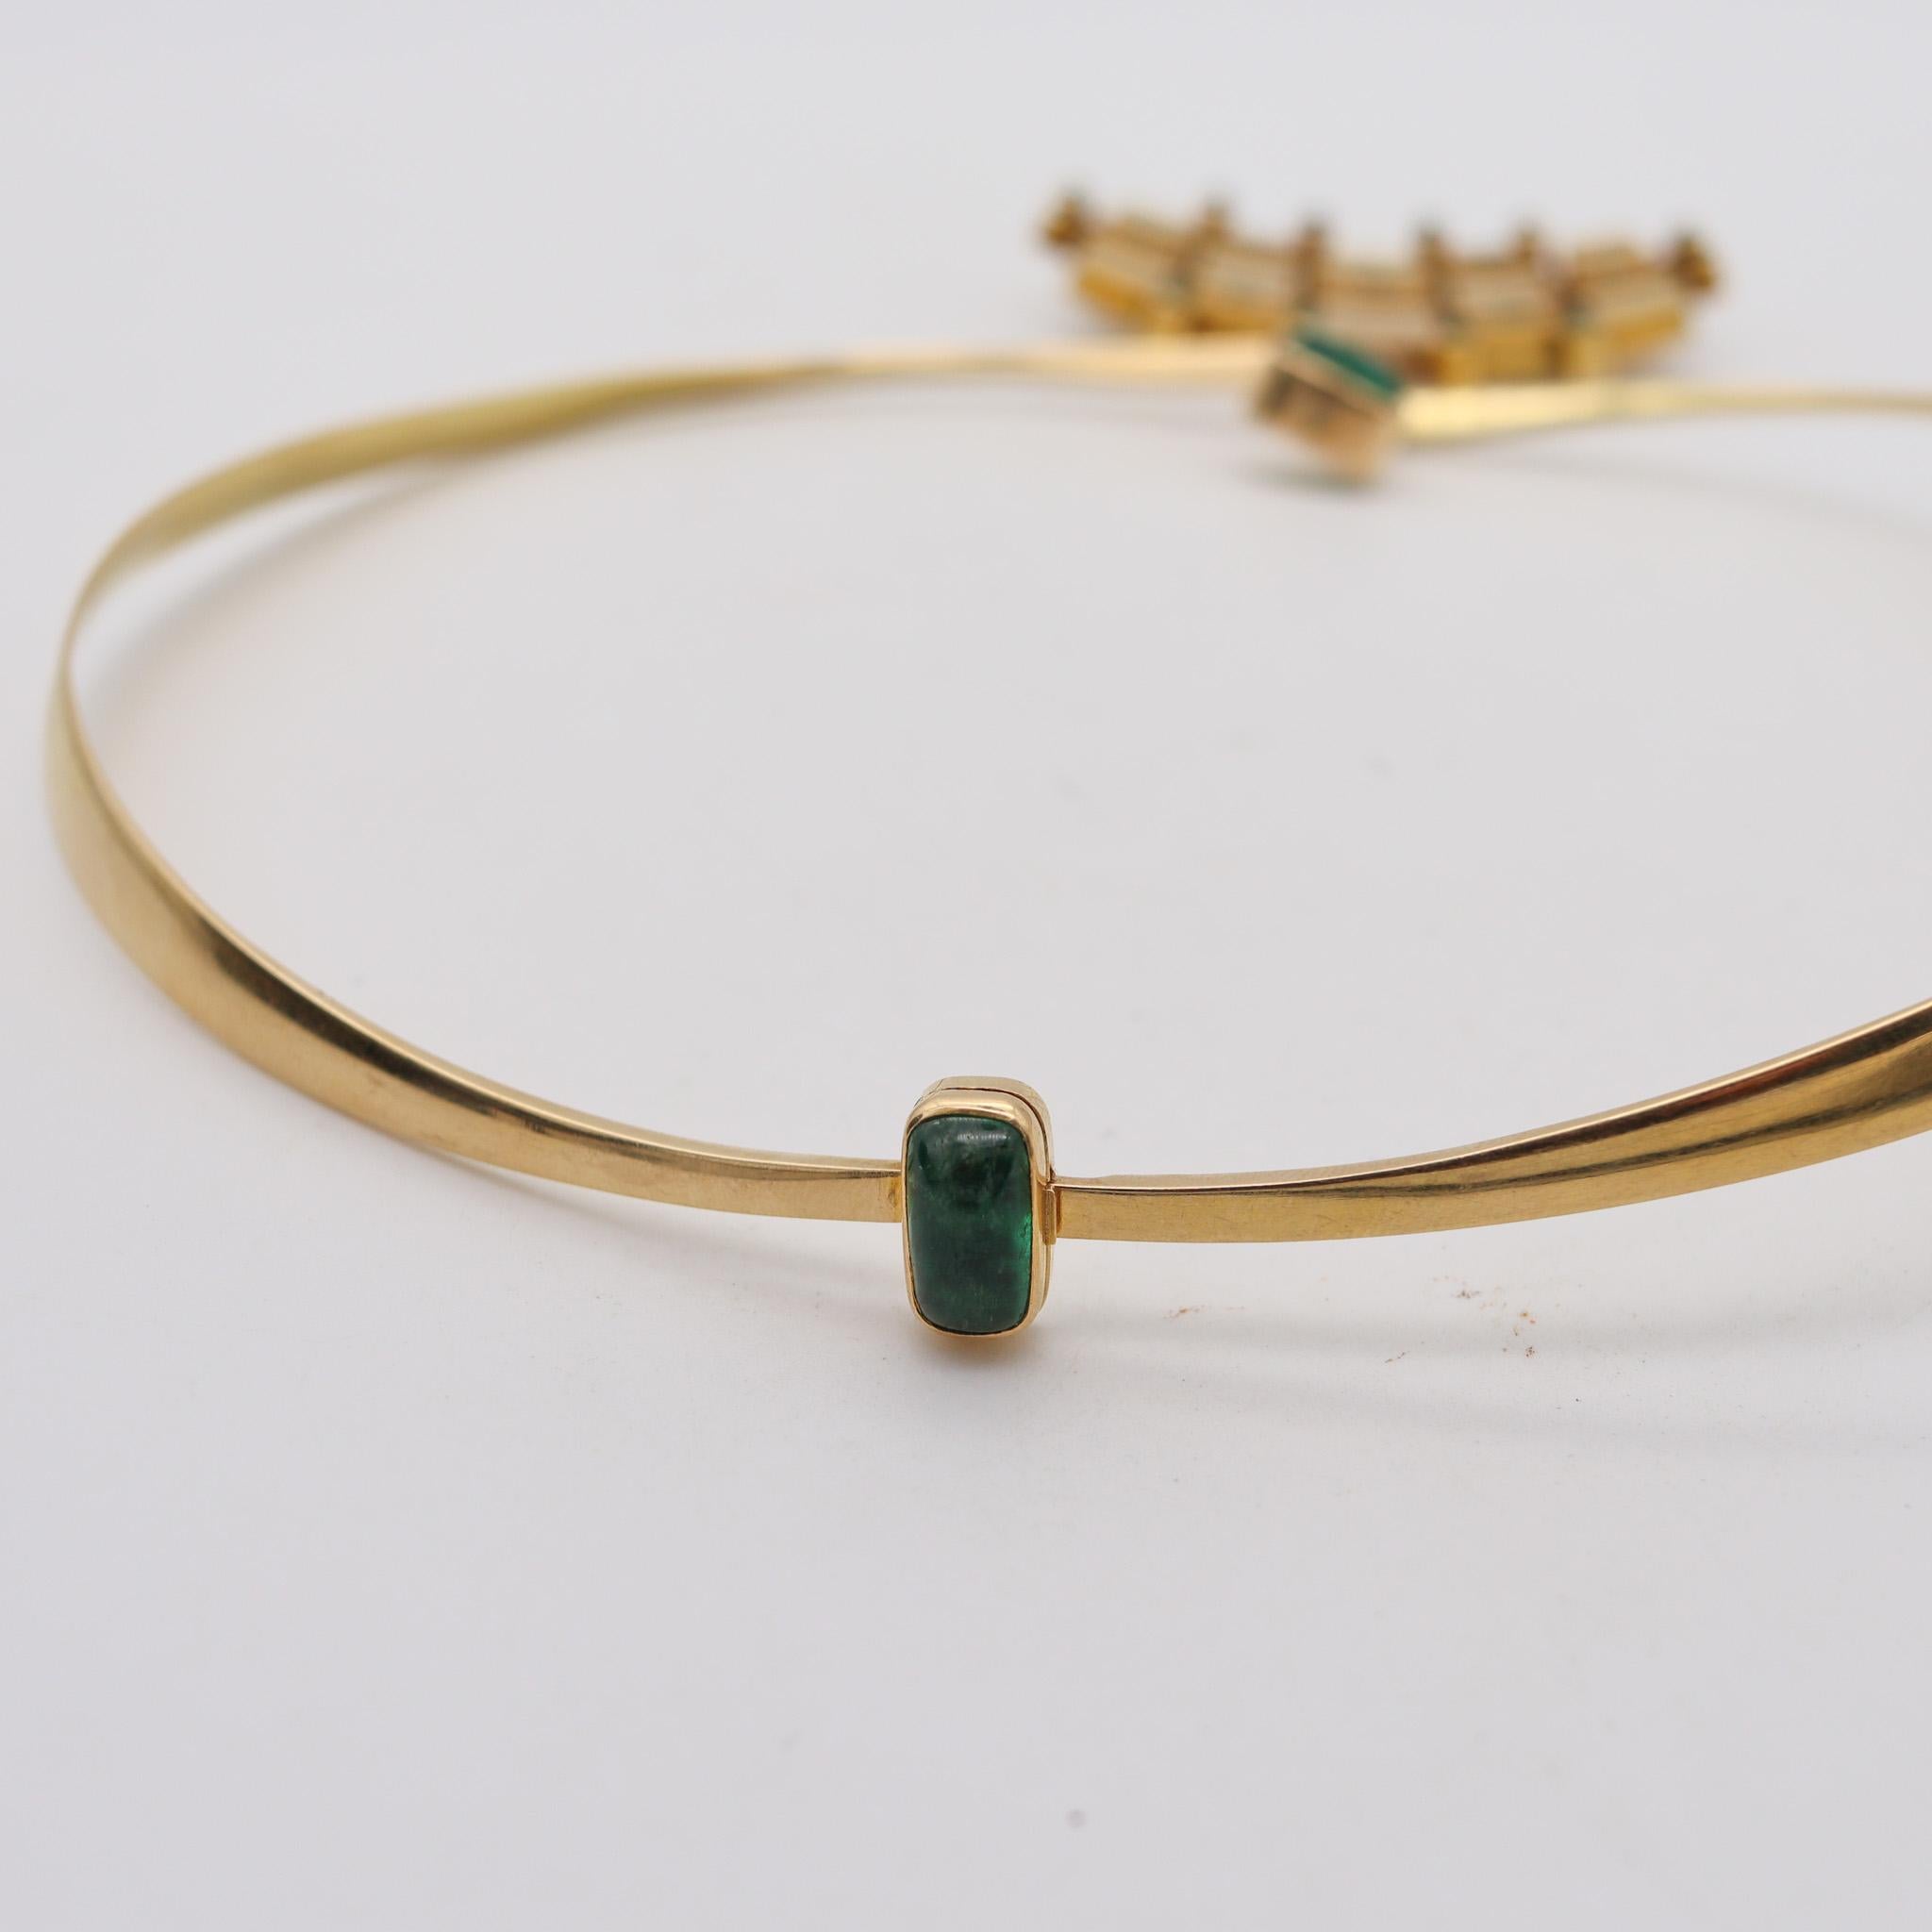 Denmark 1970 Modernist Geometric Necklace In 18Kt Gold With 9.75 Ctw In Emeralds In Excellent Condition For Sale In Miami, FL